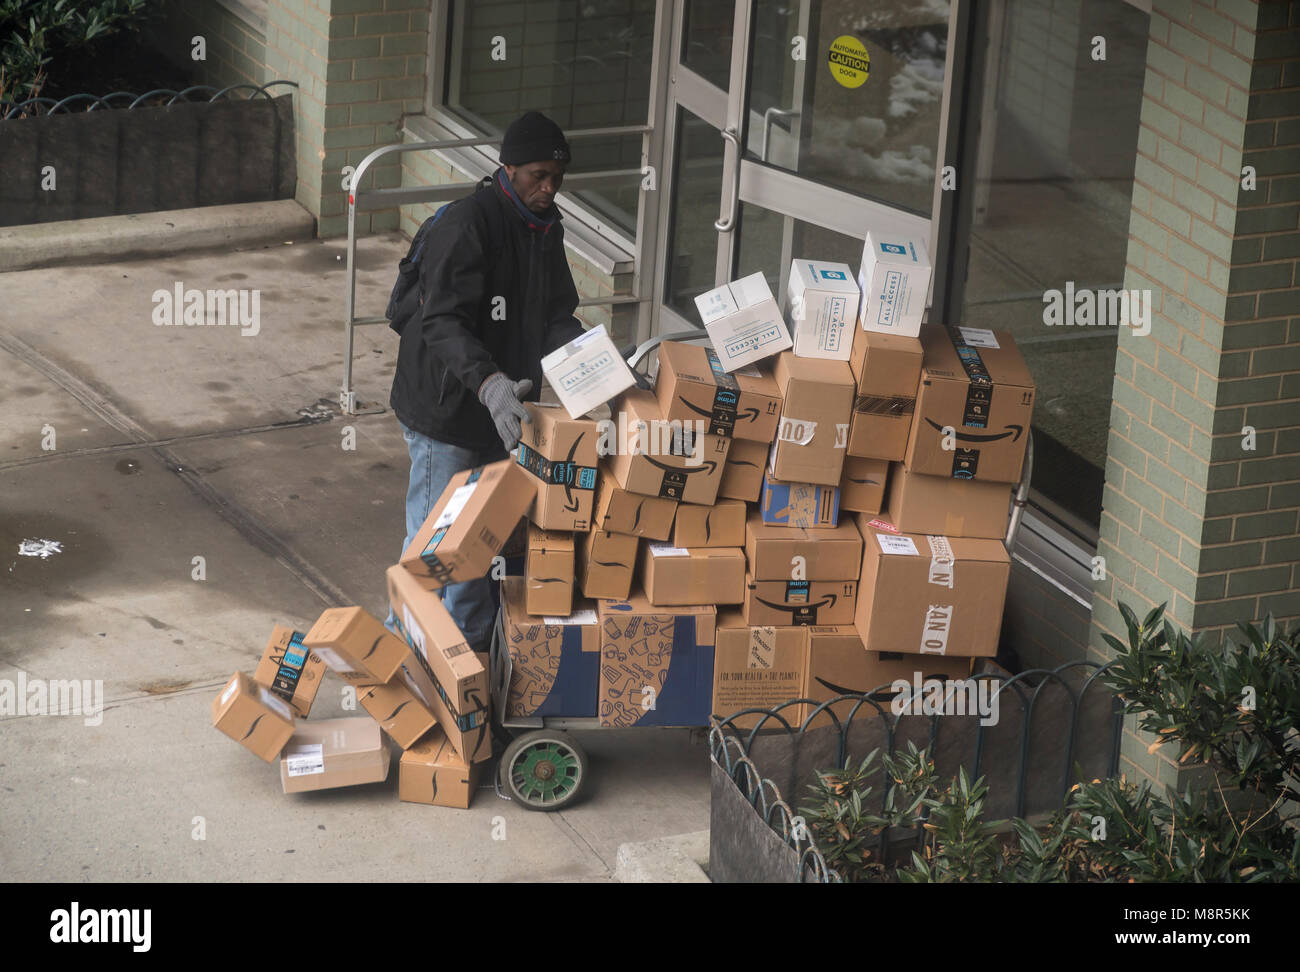 A deliveryman from Lasership with his cart laden with purchases from the likes of Amazon, Blue Apron, and others sorts his deliveries at an apartment building the Chelsea neighborhood of New York on Friday, March 9, 2018 . (© Richard B. Levine) Stock Photo